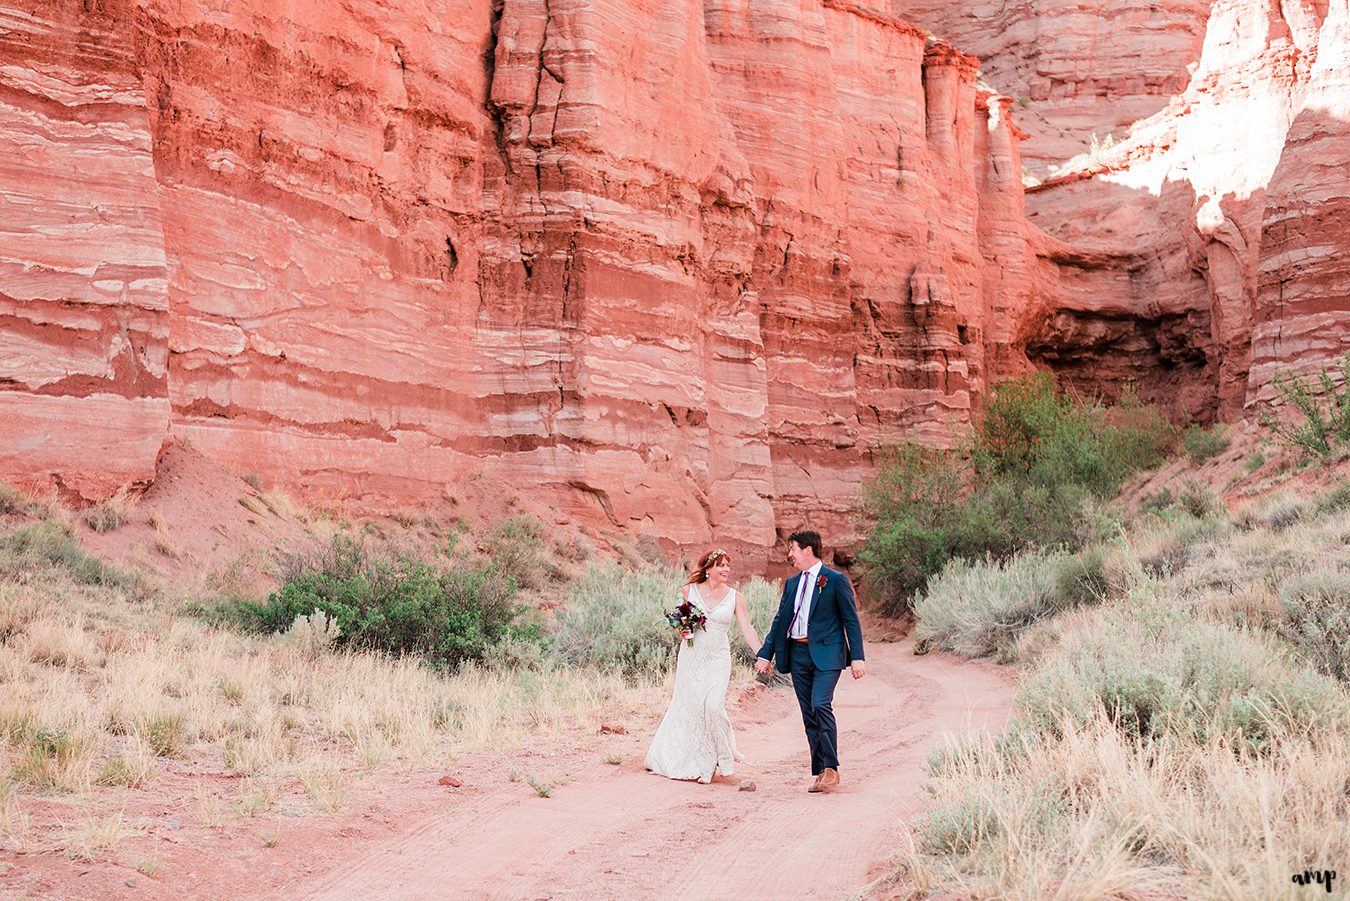 Blake and Carrie walk hand-in-hand under the Palisade of Gateway Canyons